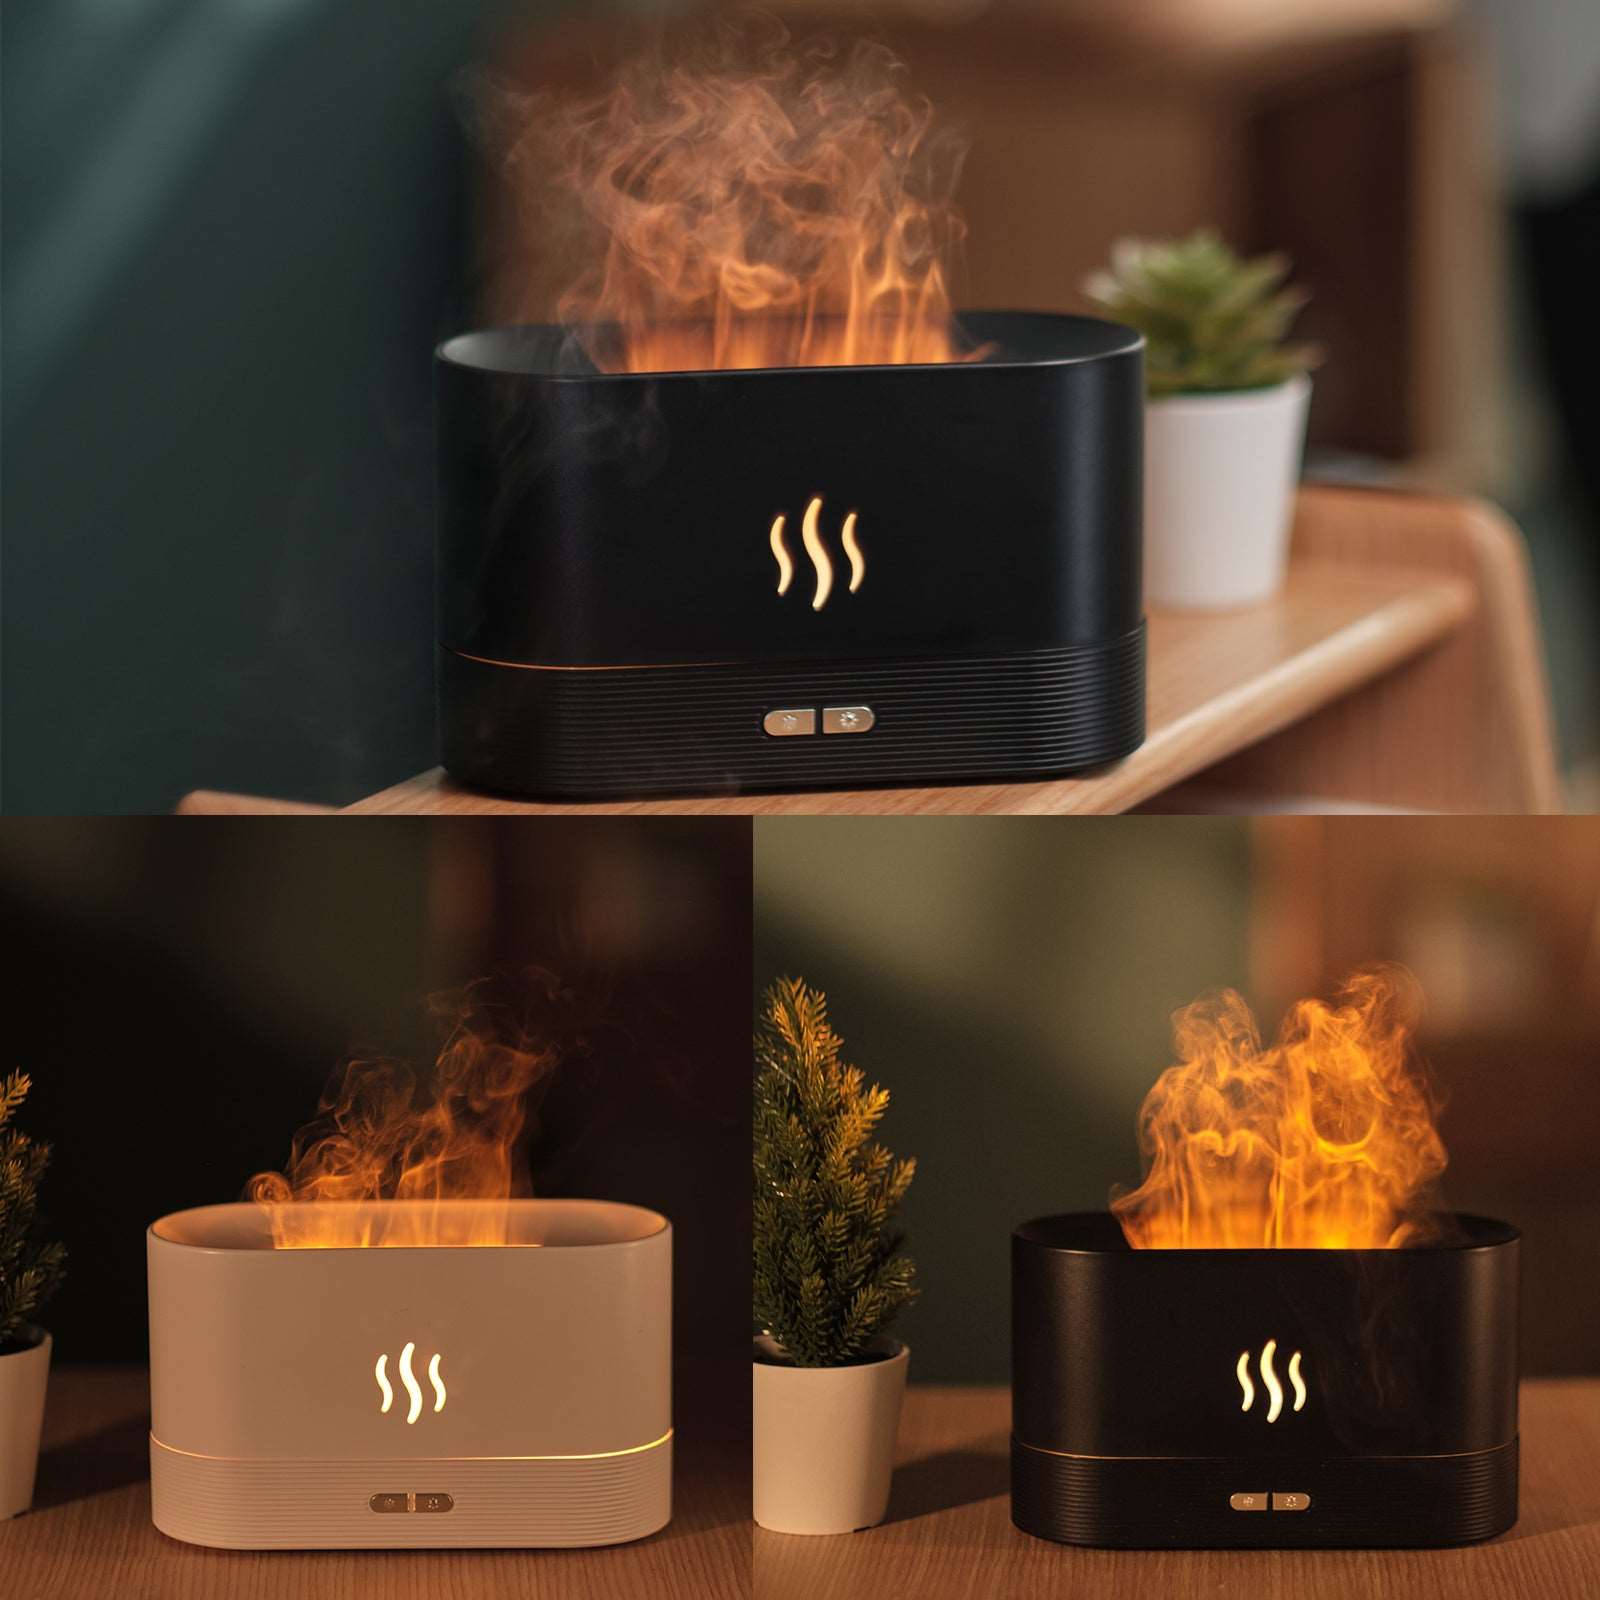 Aroma Diffuser with Flame Light | Mist Humidifier for Aromatherapy | Waterless Auto-Off Protection | Spa, Home, Yoga, Office